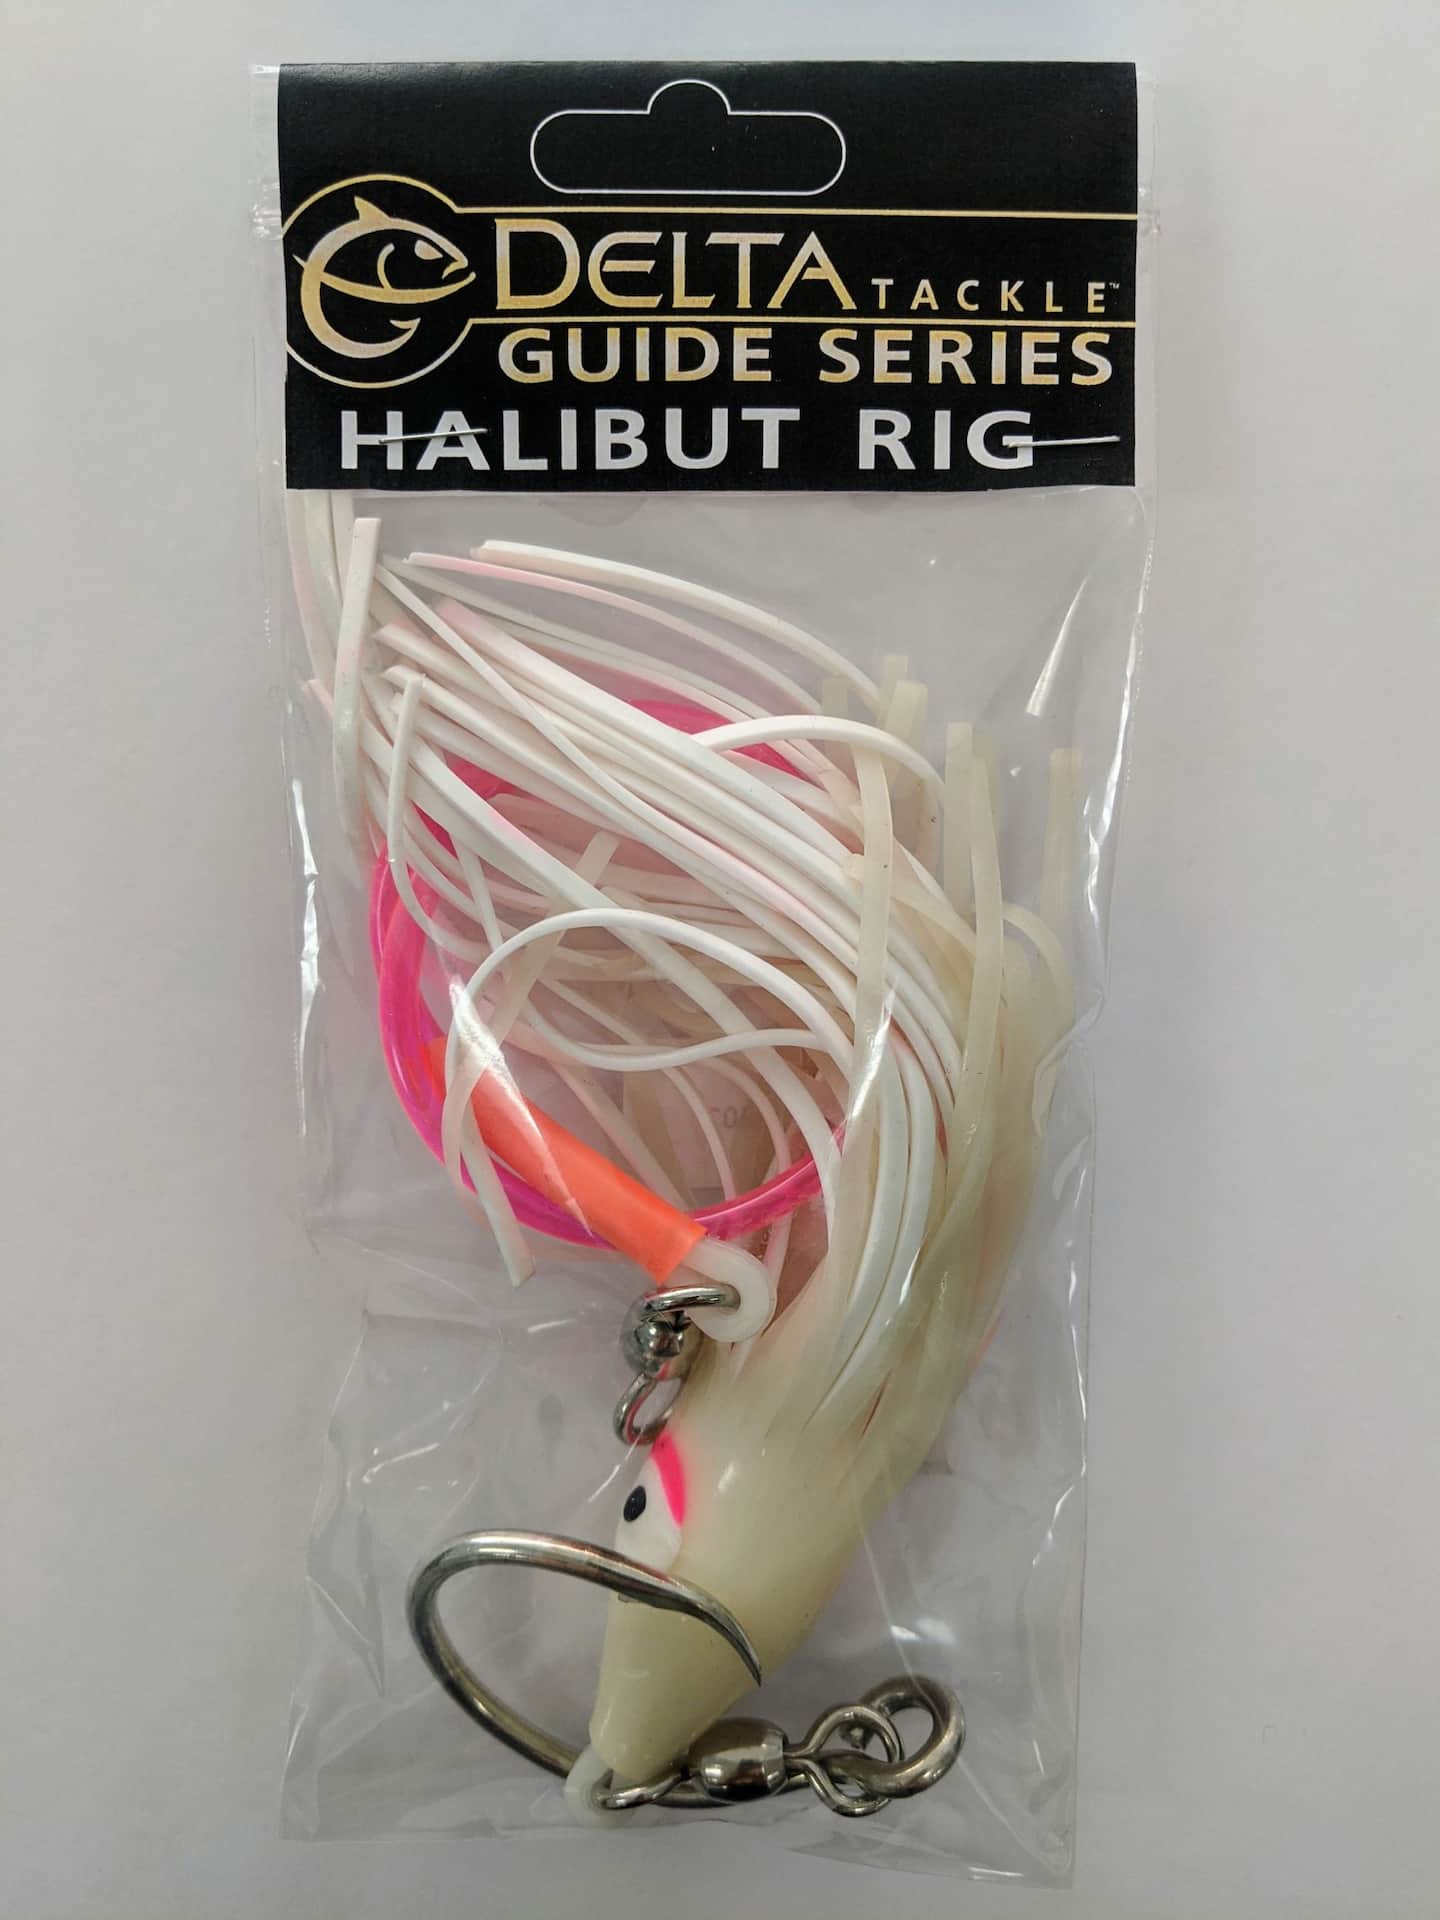 https://media-www.canadiantire.ca/product/playing/fishing/fishing-lures/0772604/delta-guide-series-hali-leader-11-0-11-0-single-hooks-100lb-af27423d-8337-429d-8b58-87a0bd9cddb9-jpgrendition.jpg